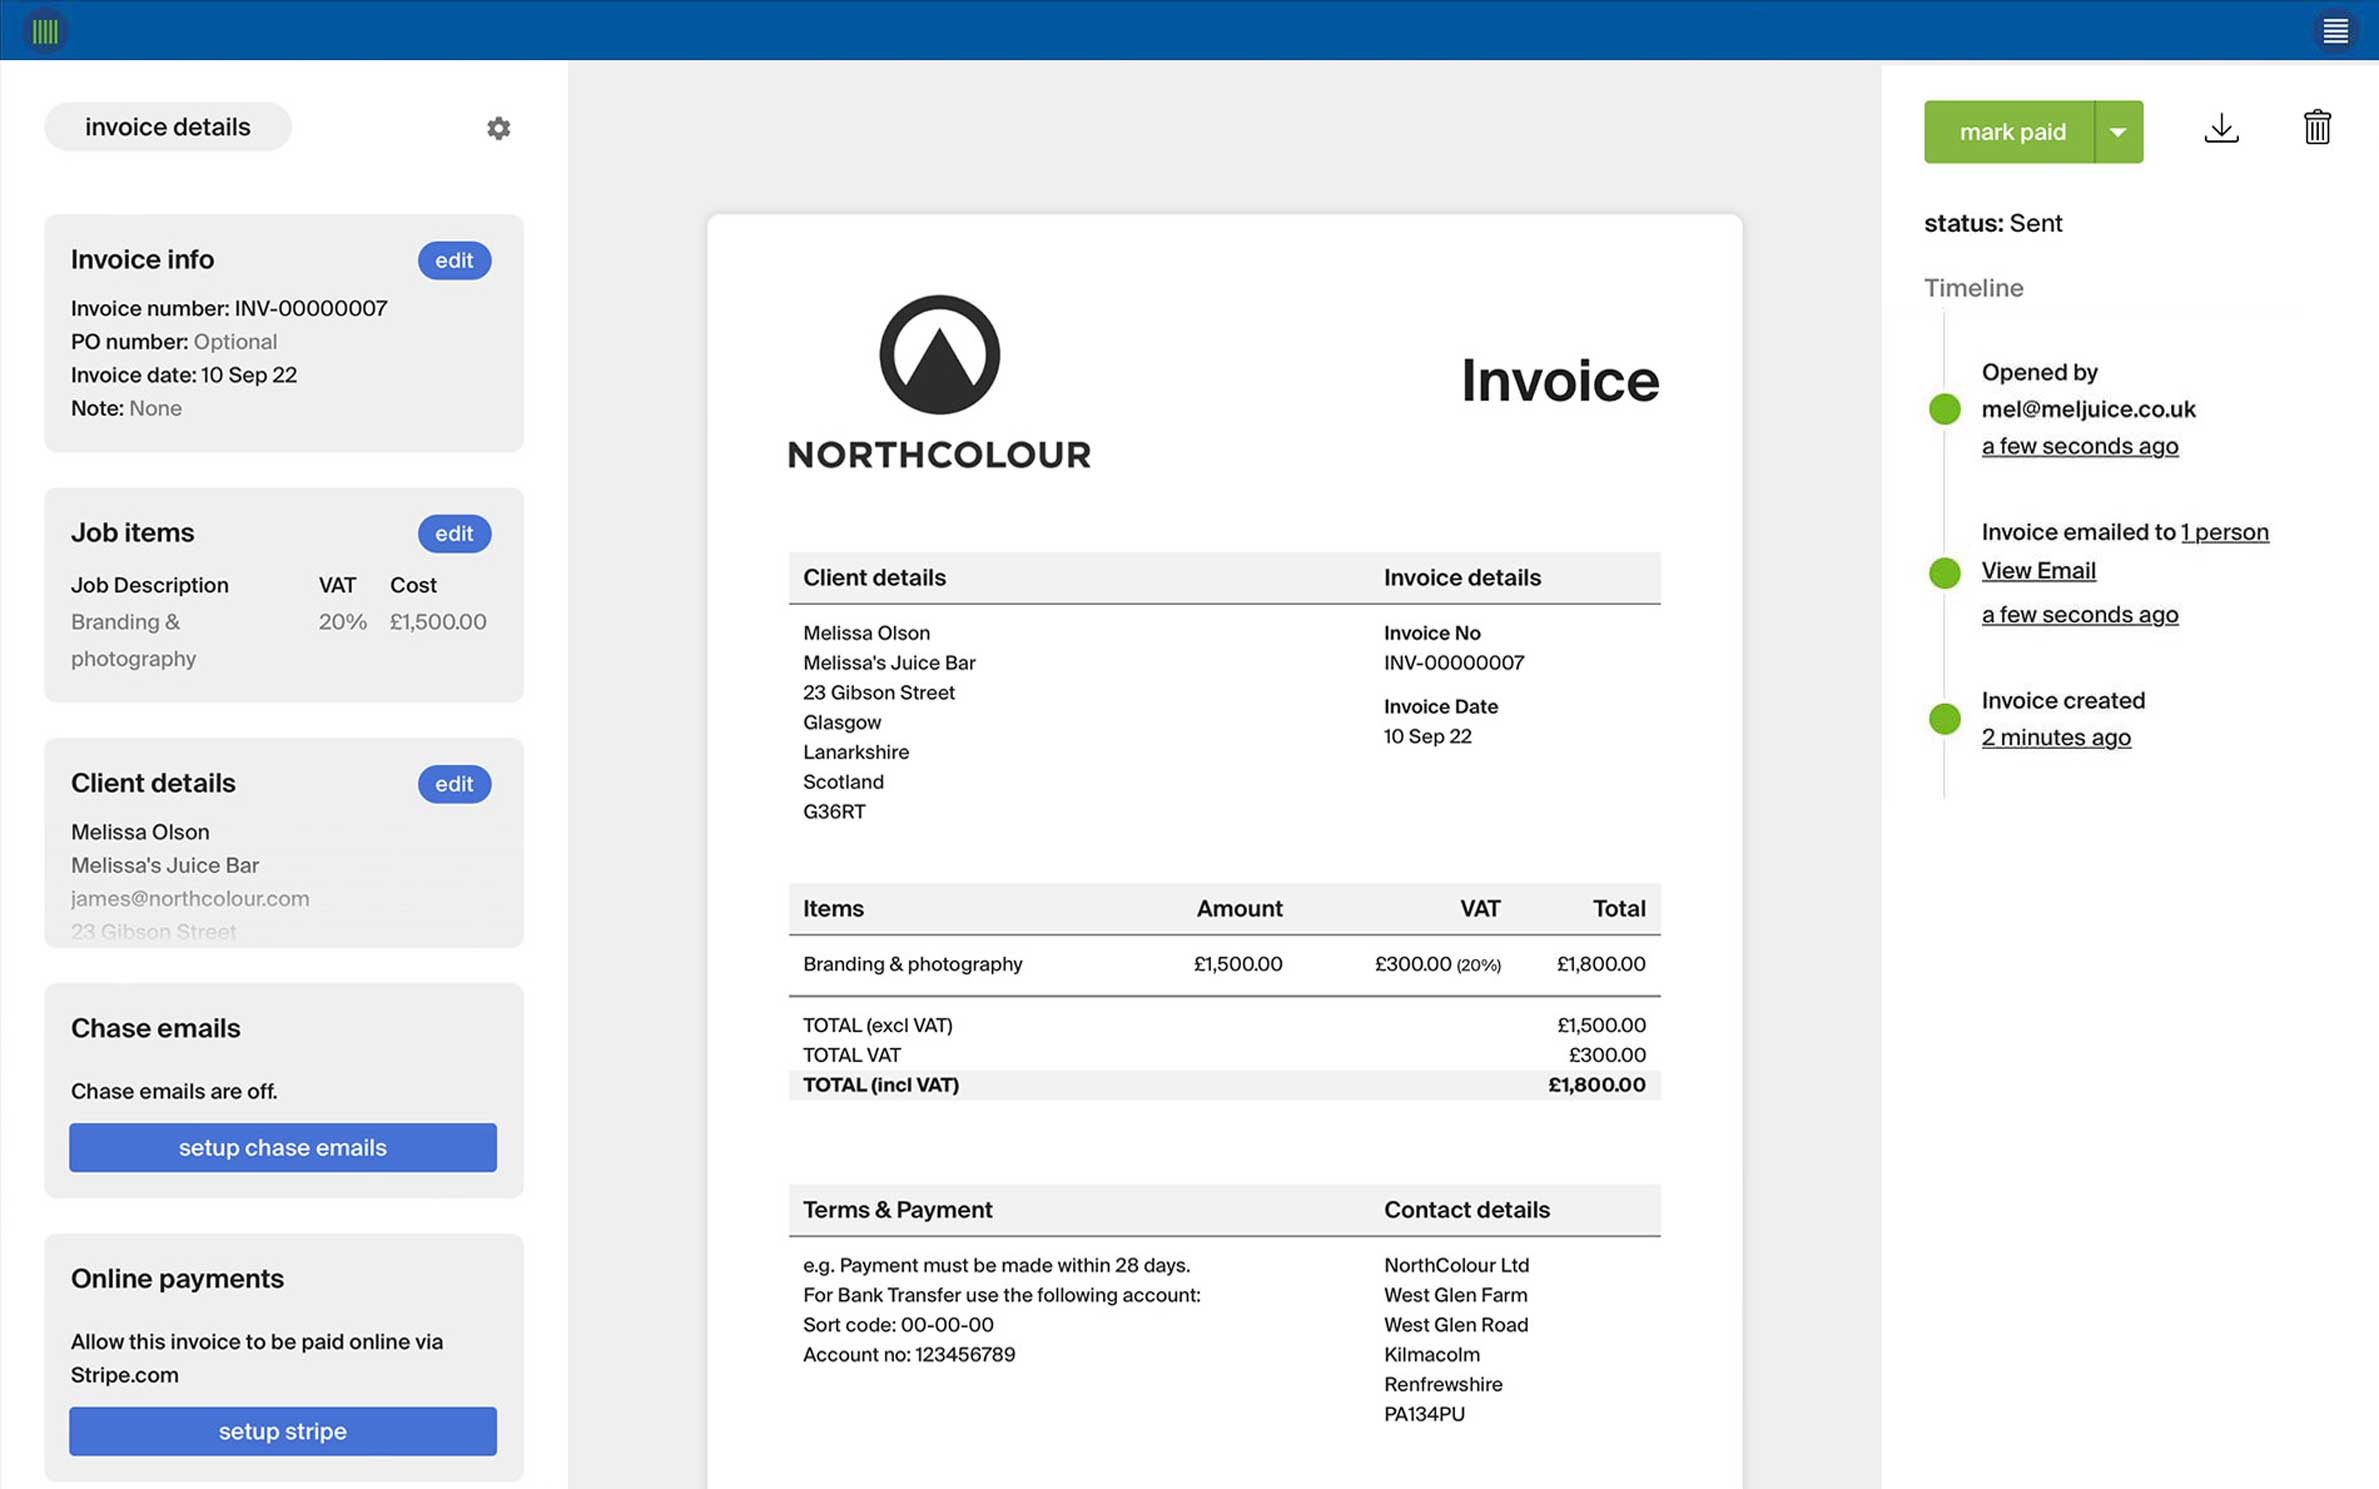 Send invoices in seconds